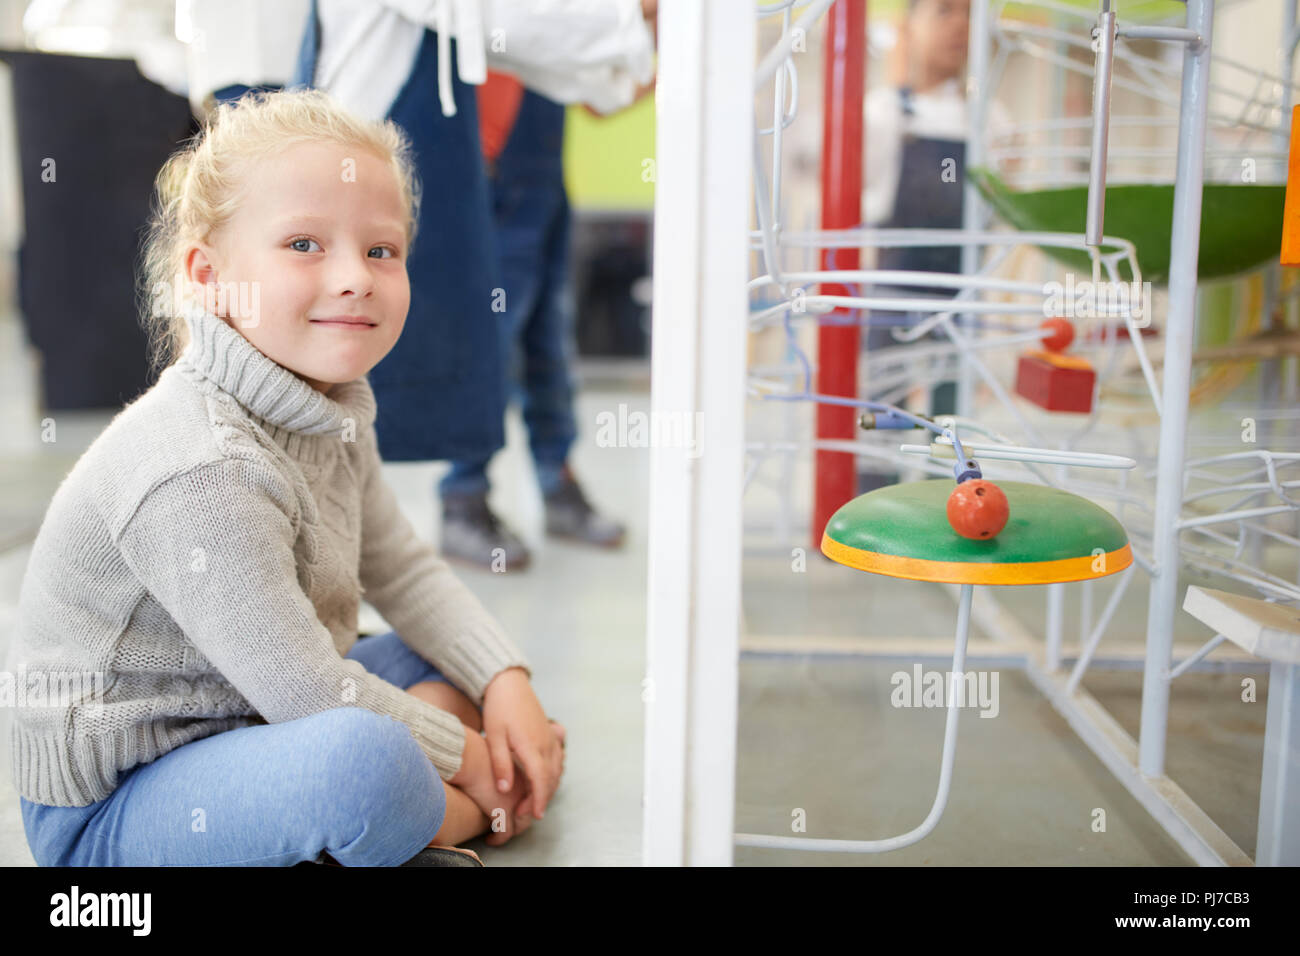 Portrait smiling, confident girl watching exhibit in science center Stock Photo